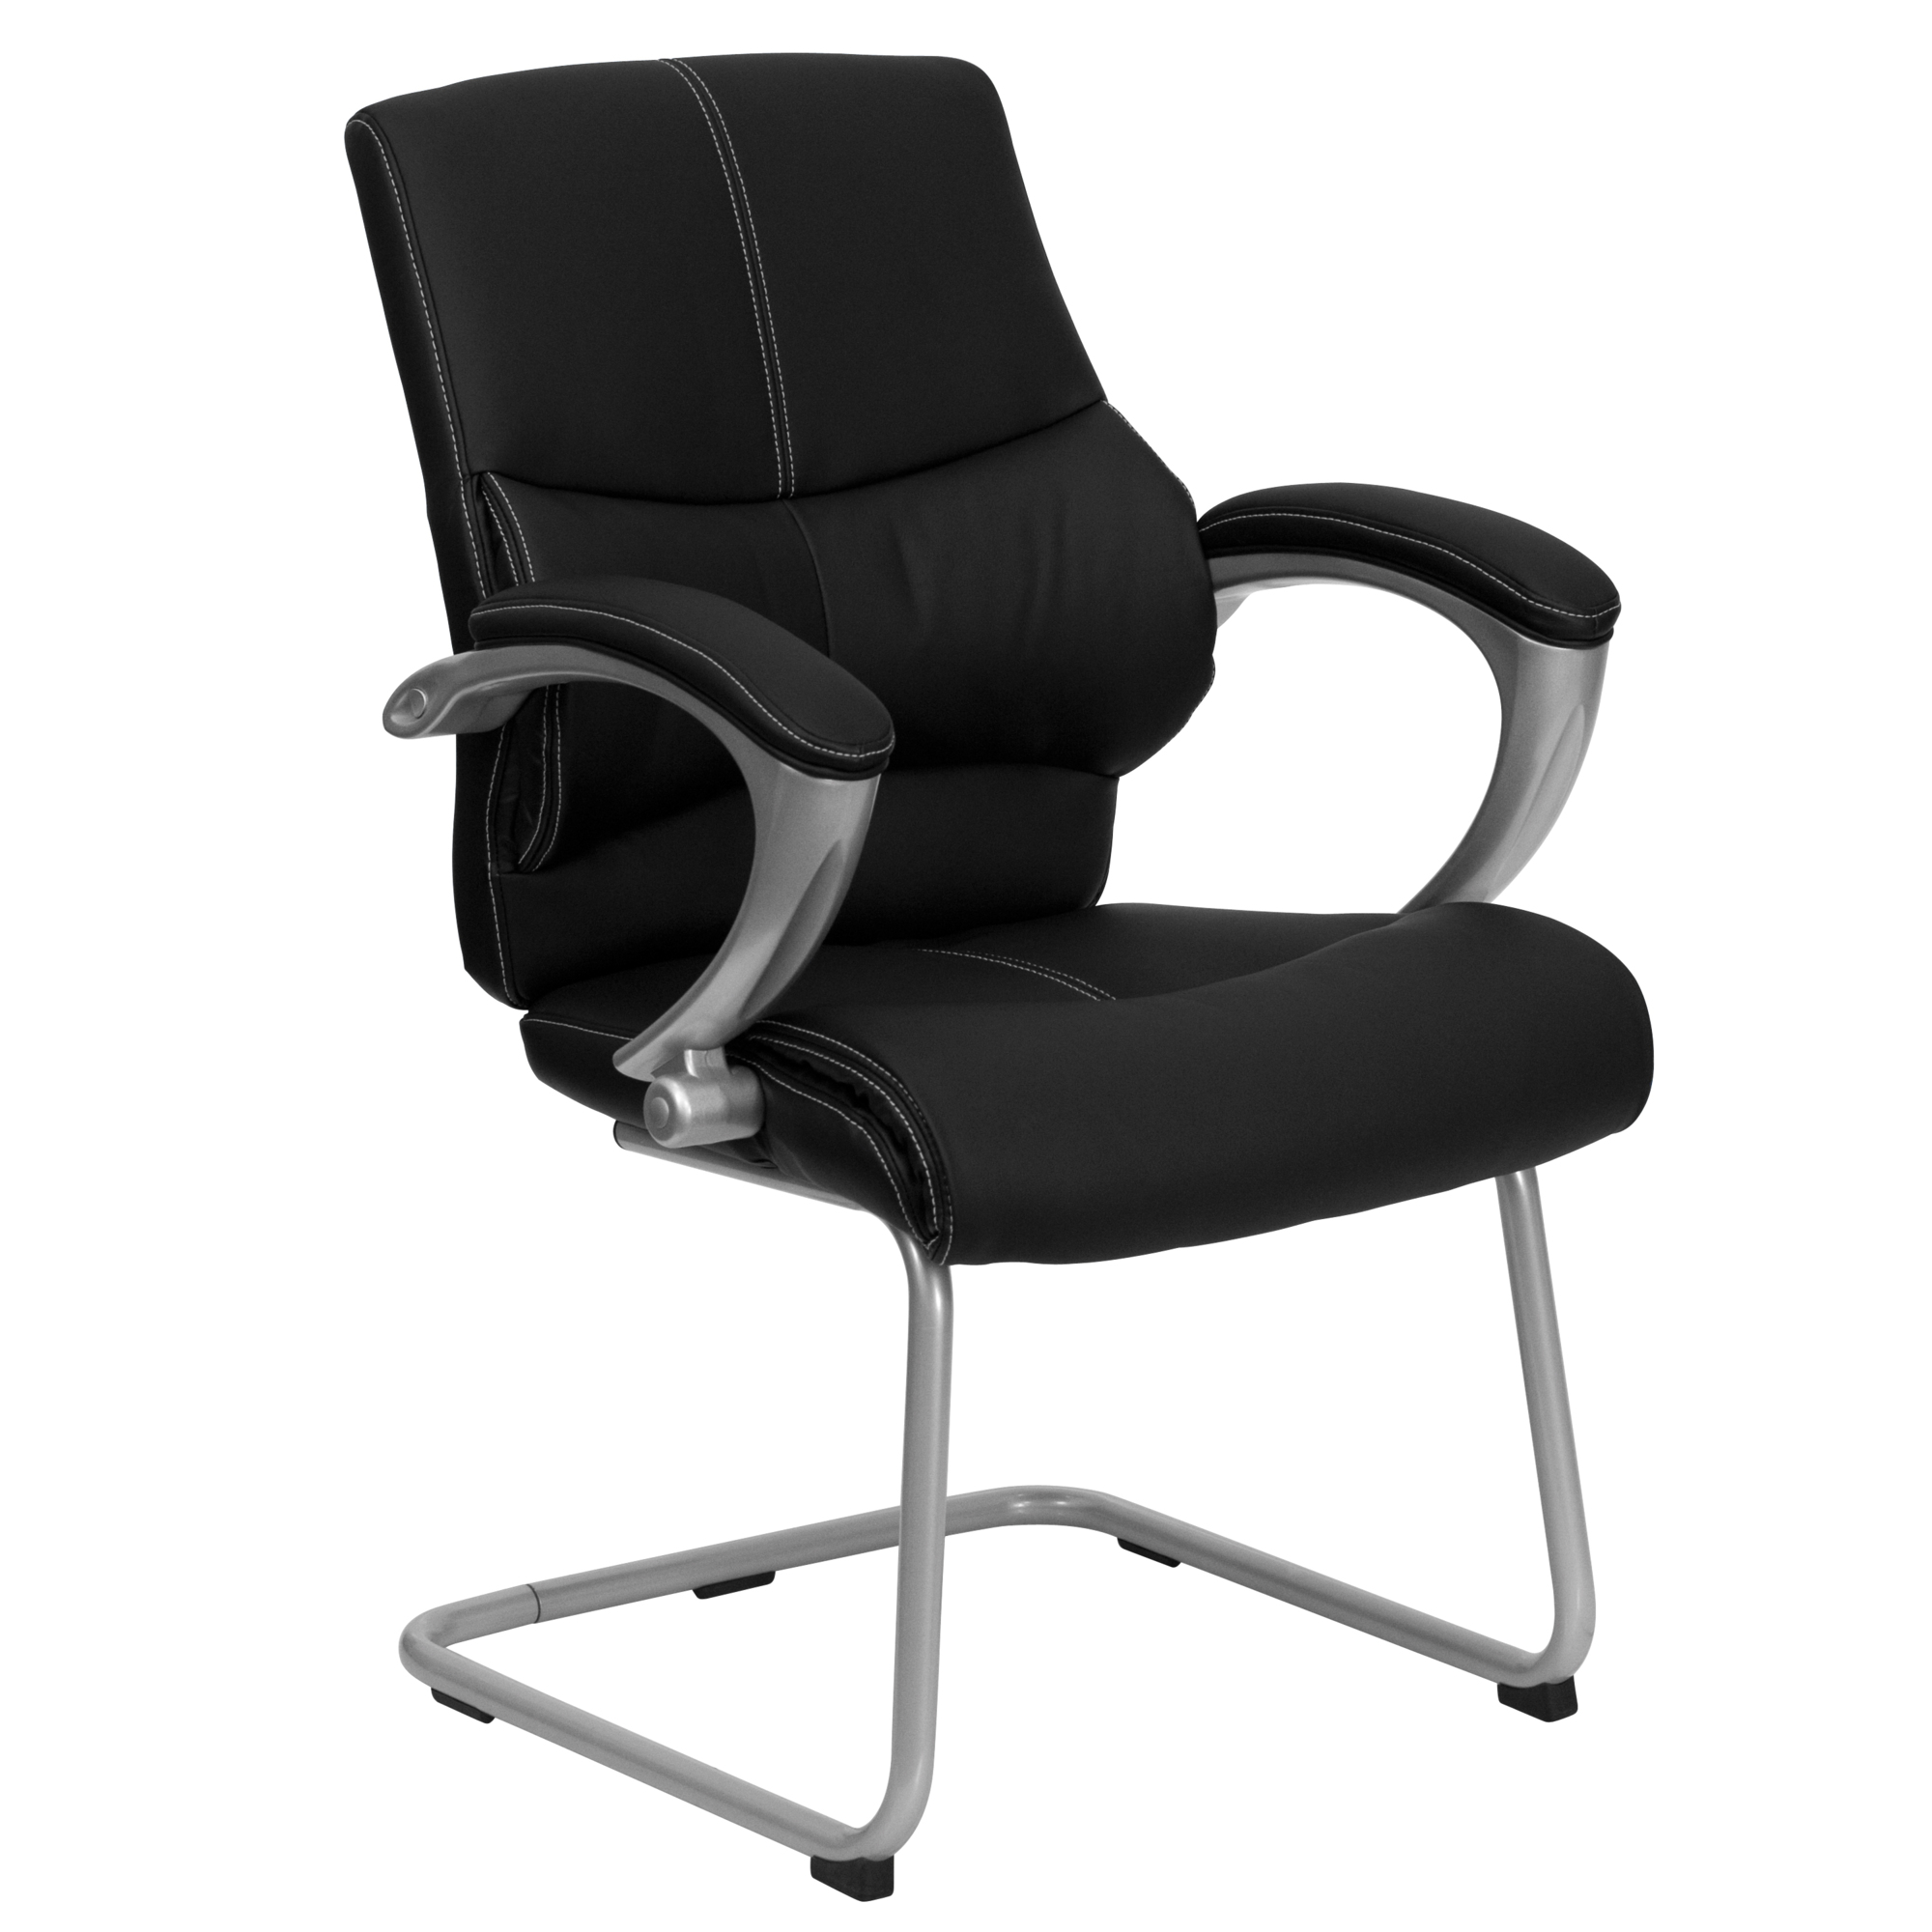 Flash Furniture, Black LeatherSoft Side Reception Chair - Sled Base, Primary Color Black, Included (qty.) 1, Model H9637L3SIDE